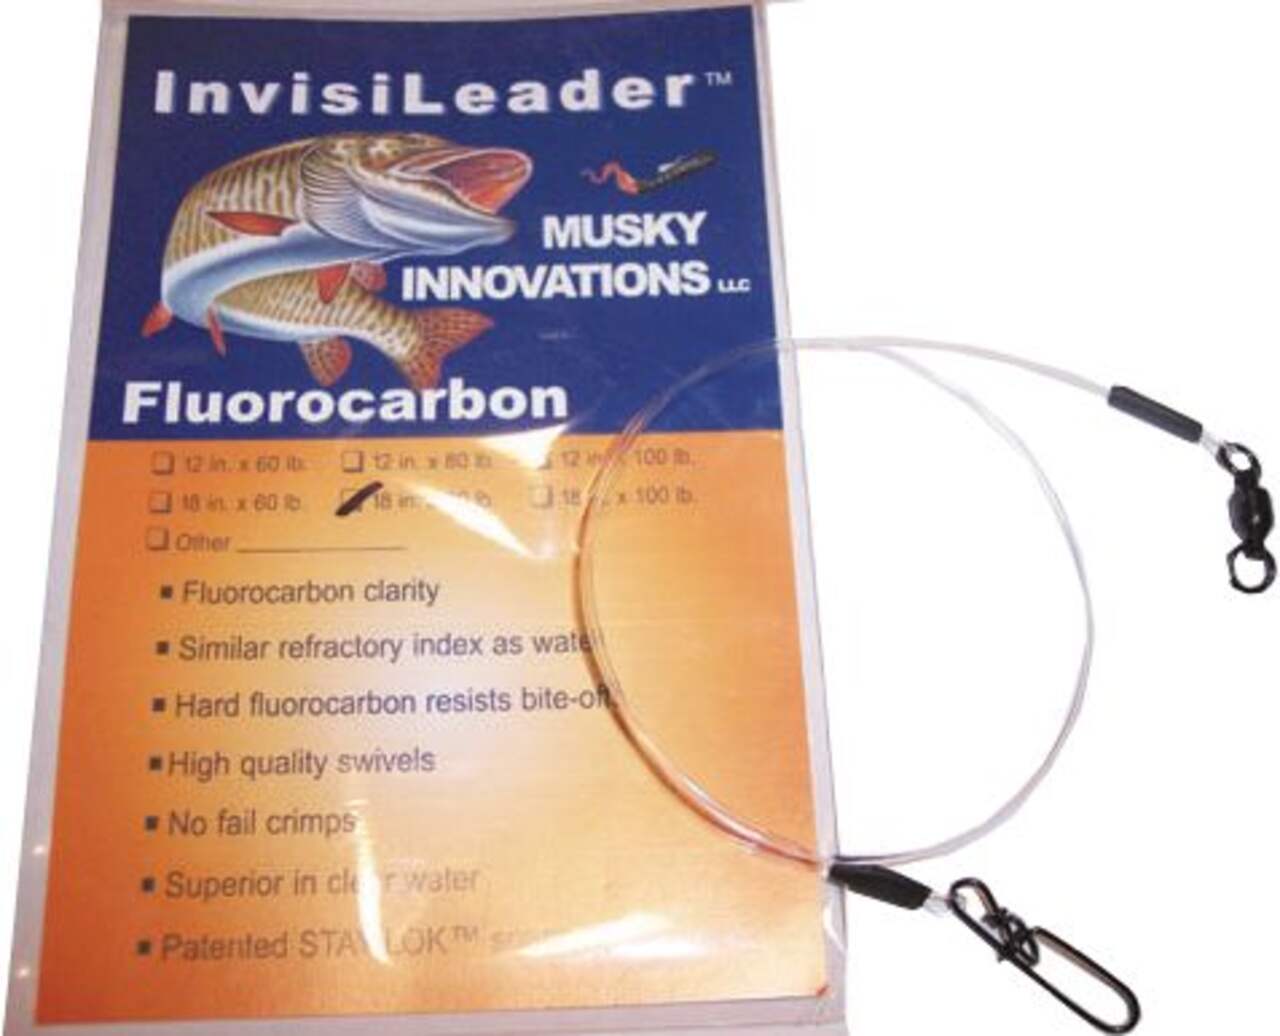 https://media-www.canadiantire.ca/product/playing/fishing/fishing-lures/1785564/musky-innovations-fluorocarbon-leader-18-80lb-d037a285-7a7b-4b4c-9f07-da0100213e68-jpgrendition.jpg?imdensity=1&imwidth=640&impolicy=mZoom